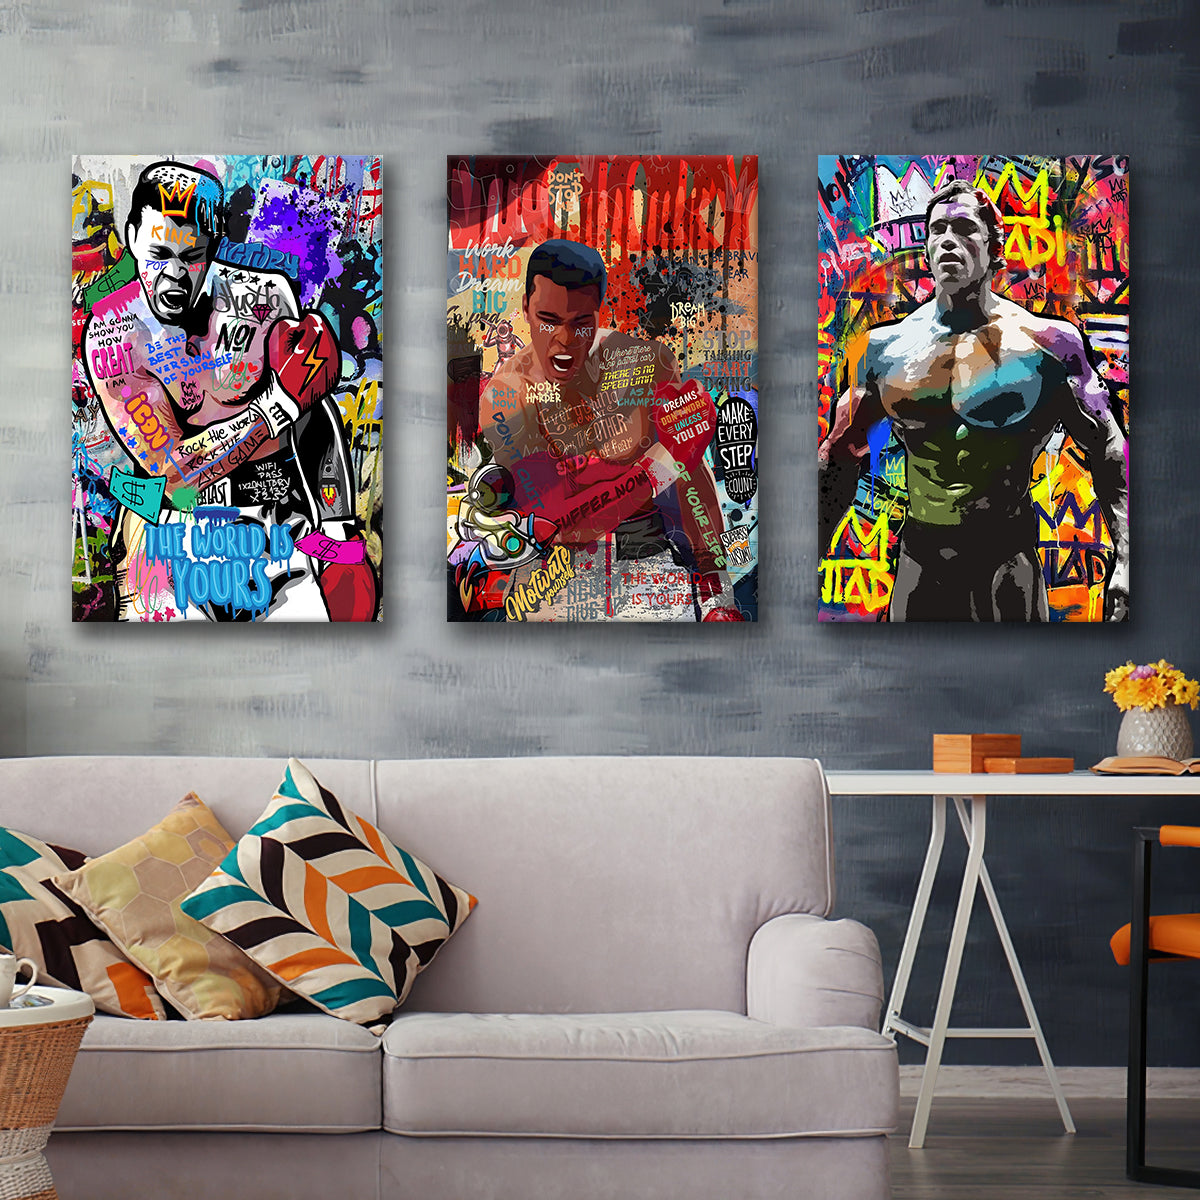 WJJFA Man Boxing Wallpaper 3D Wall Murals, Oil Painting Art Mural Wallpaper  Decor Paintings, Suitable for Boxing Gym Boxing Match Living Room and